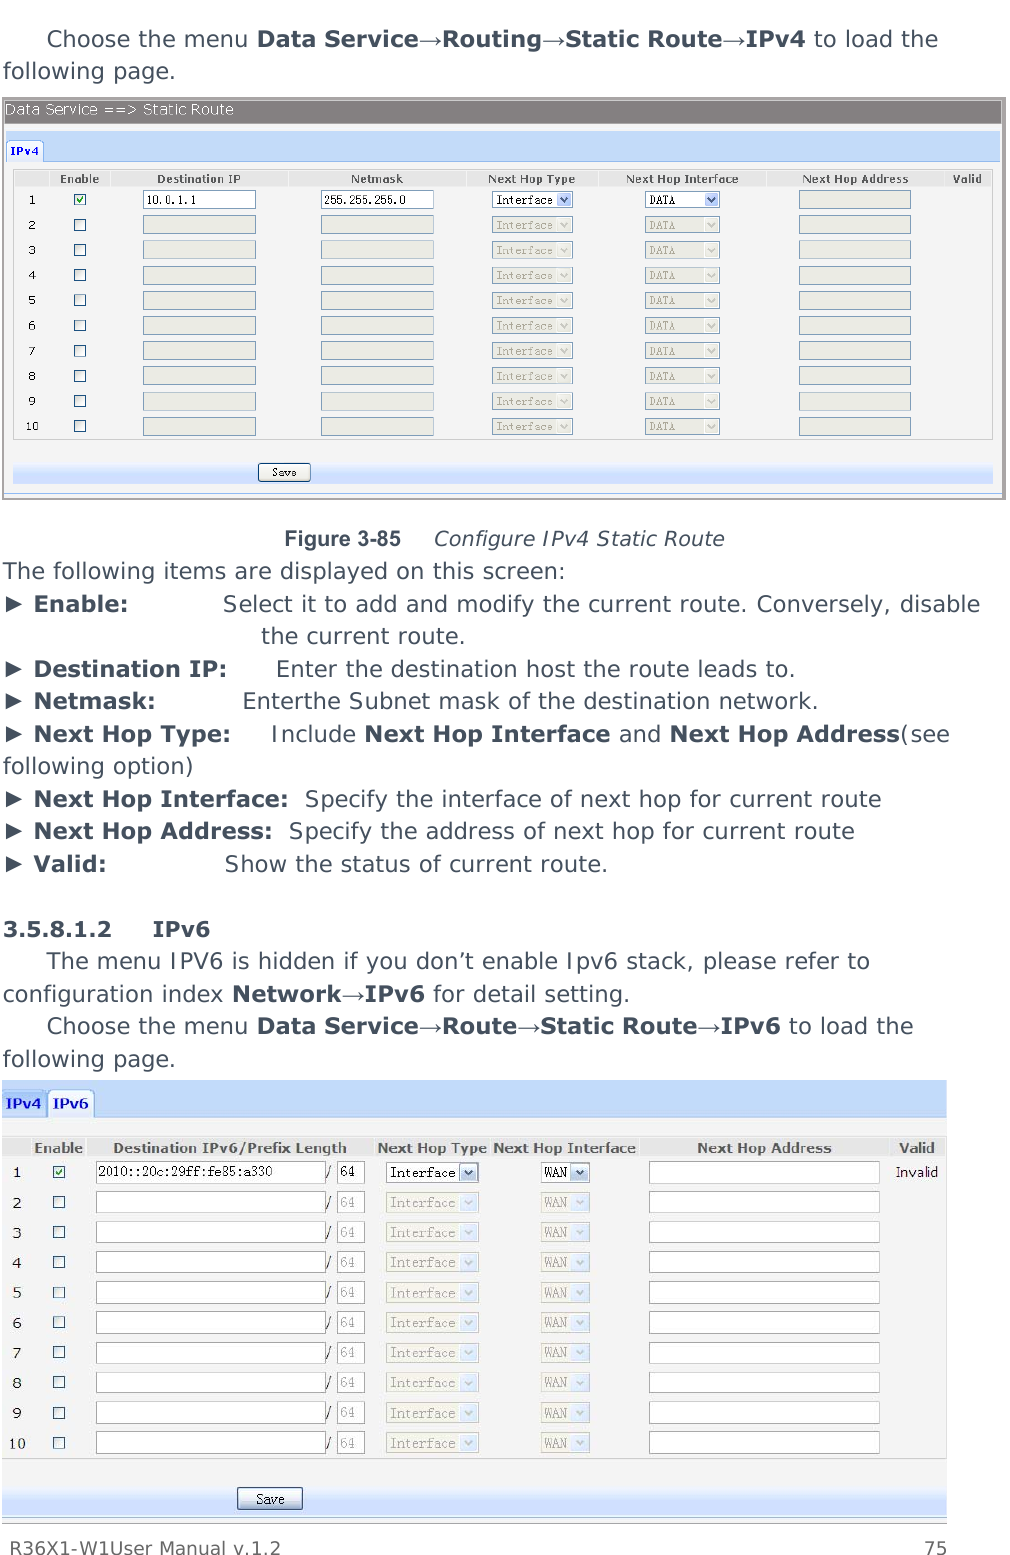           R36X1-W1User Manual v.1.2    75  Choose the menu Data Service→Routing→Static Route→IPv4 to load the following page.  Figure 3-85  Configure IPv4 Static Route The following items are displayed on this screen: ► Enable:            Select it to add and modify the current route. Conversely, disable the current route. ► Destination IP:      Enter the destination host the route leads to. ► Netmask:           Enterthe Subnet mask of the destination network. ► Next Hop Type:     Include Next Hop Interface and Next Hop Address(see following option) ► Next Hop Interface:  Specify the interface of next hop for current route ► Next Hop Address:  Specify the address of next hop for current route ► Valid:               Show the status of current route.  3.5.8.1.2 IPv6 The menu IPV6 is hidden if you don’t enable Ipv6 stack, please refer to configuration index Network→IPv6 for detail setting.  Choose the menu Data Service→Route→Static Route→IPv6 to load the following page.  